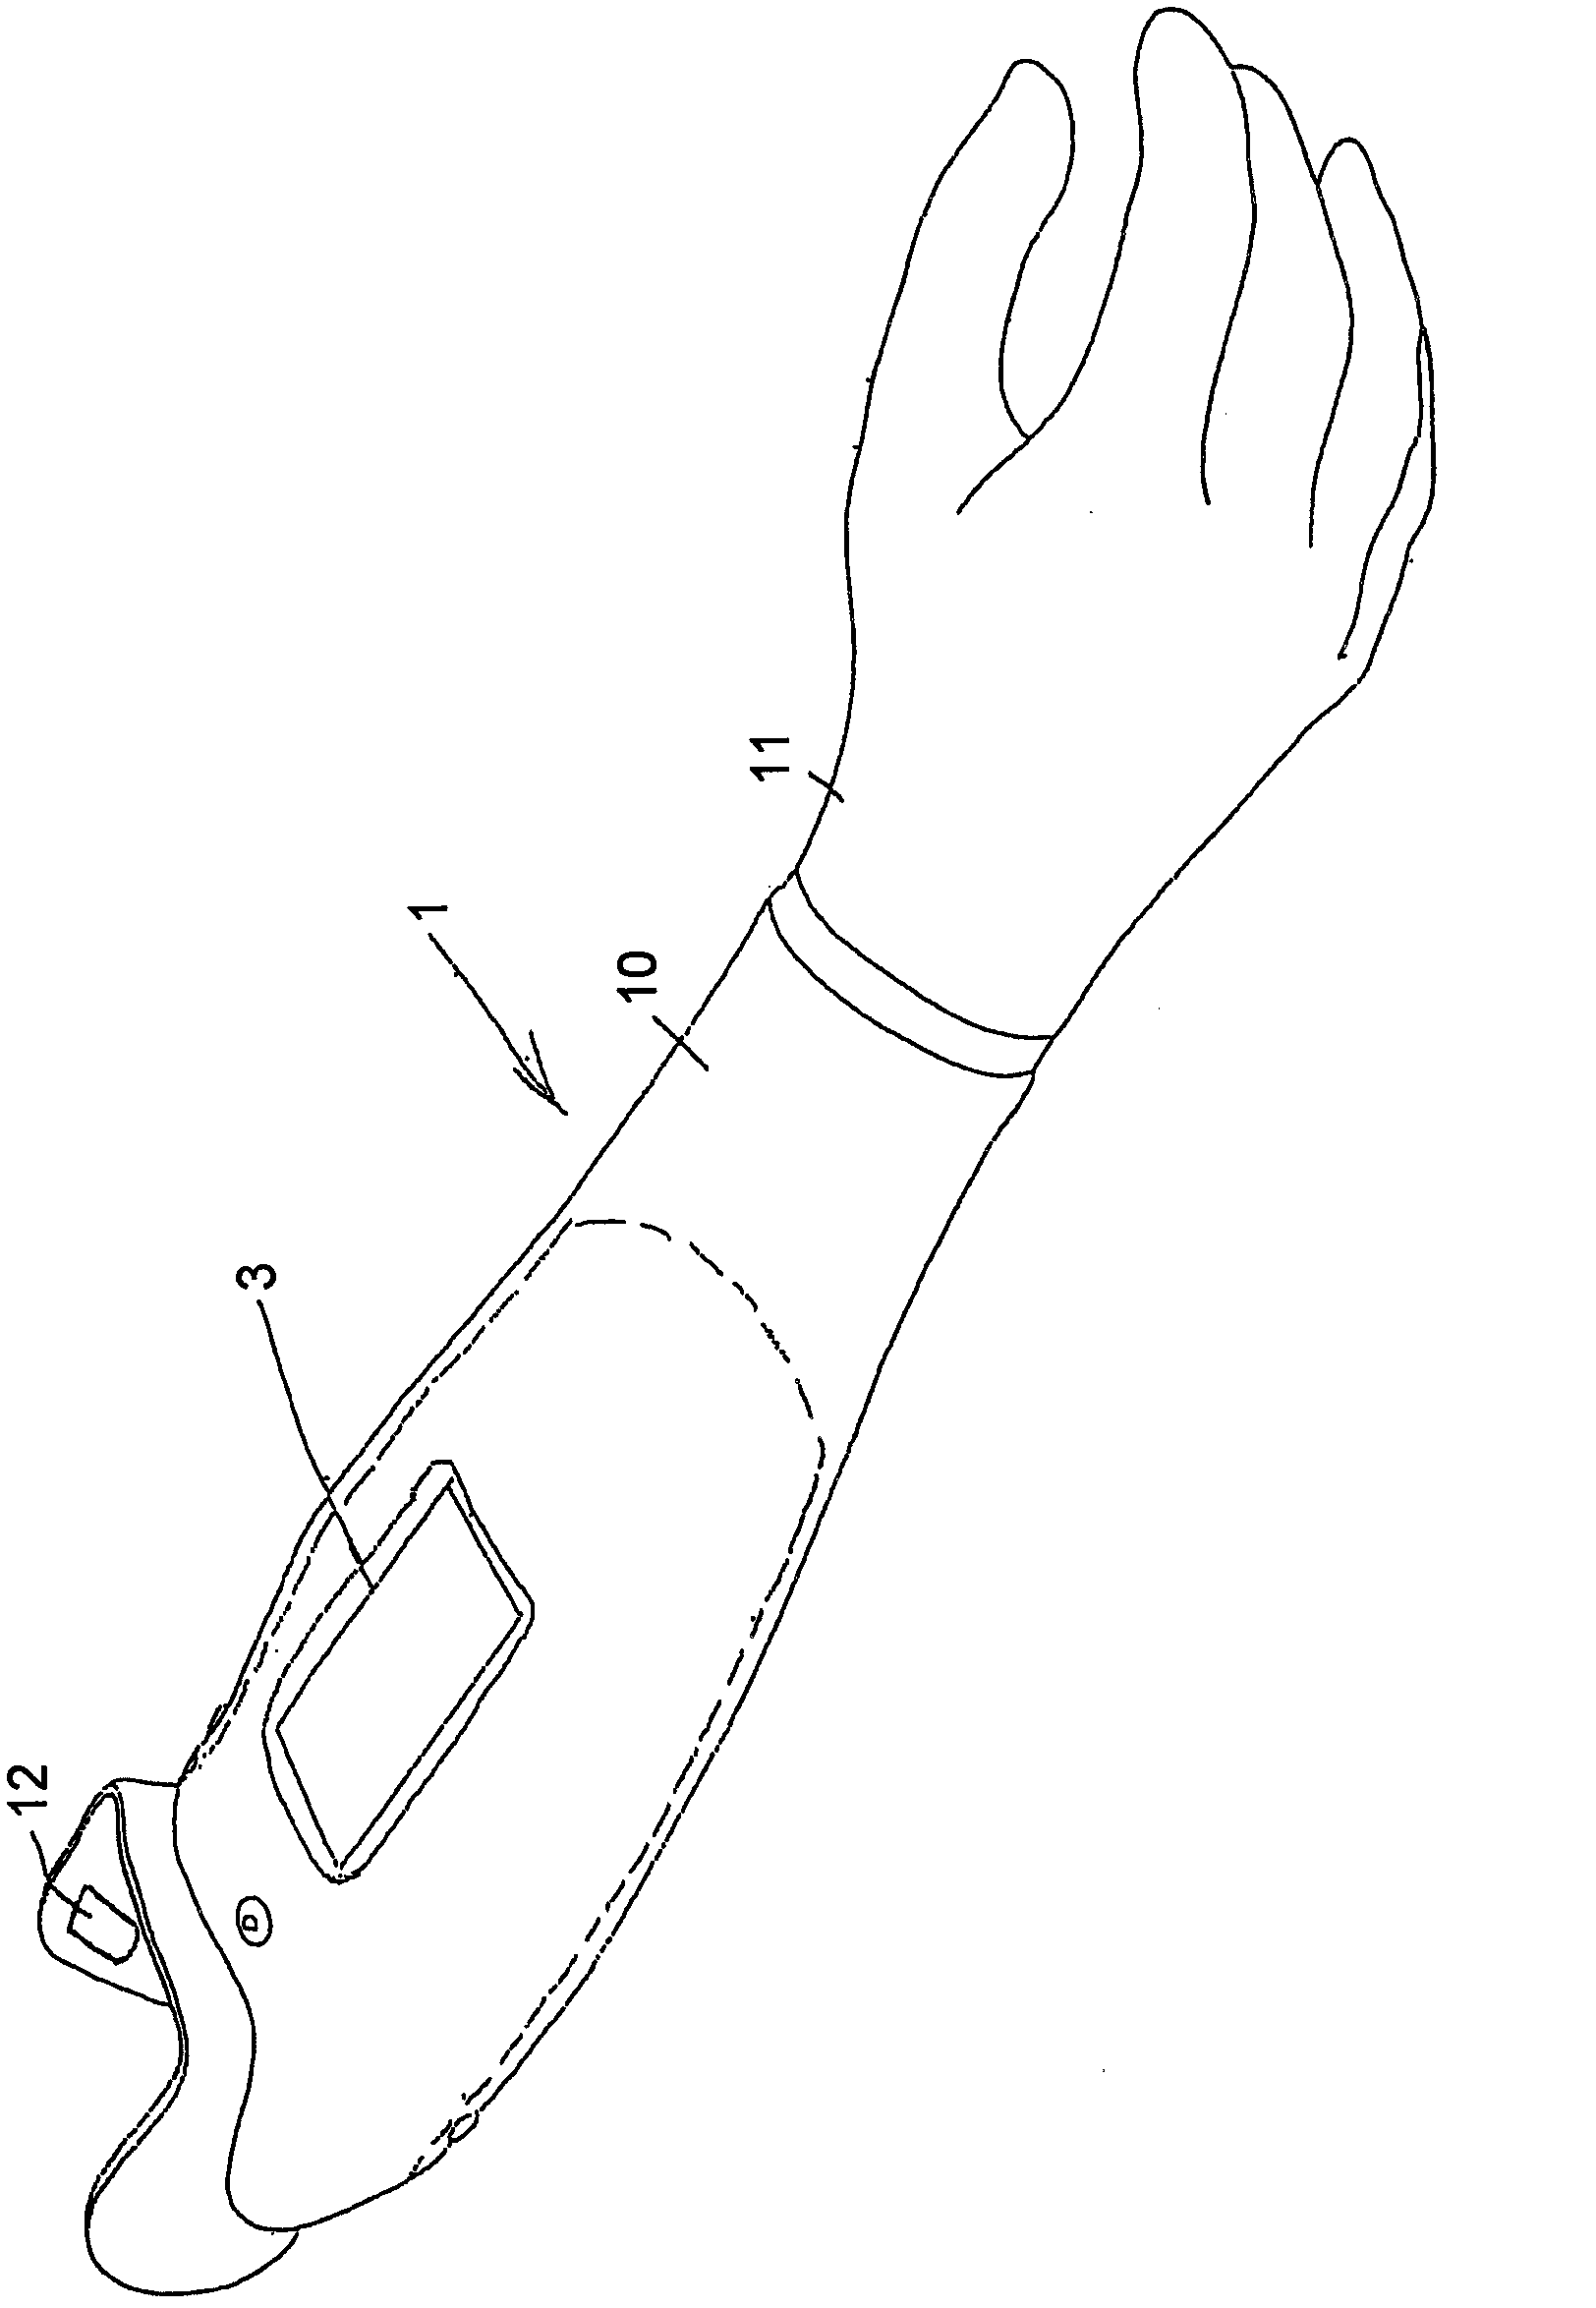 Method for setting up a control and technical orthopedic device